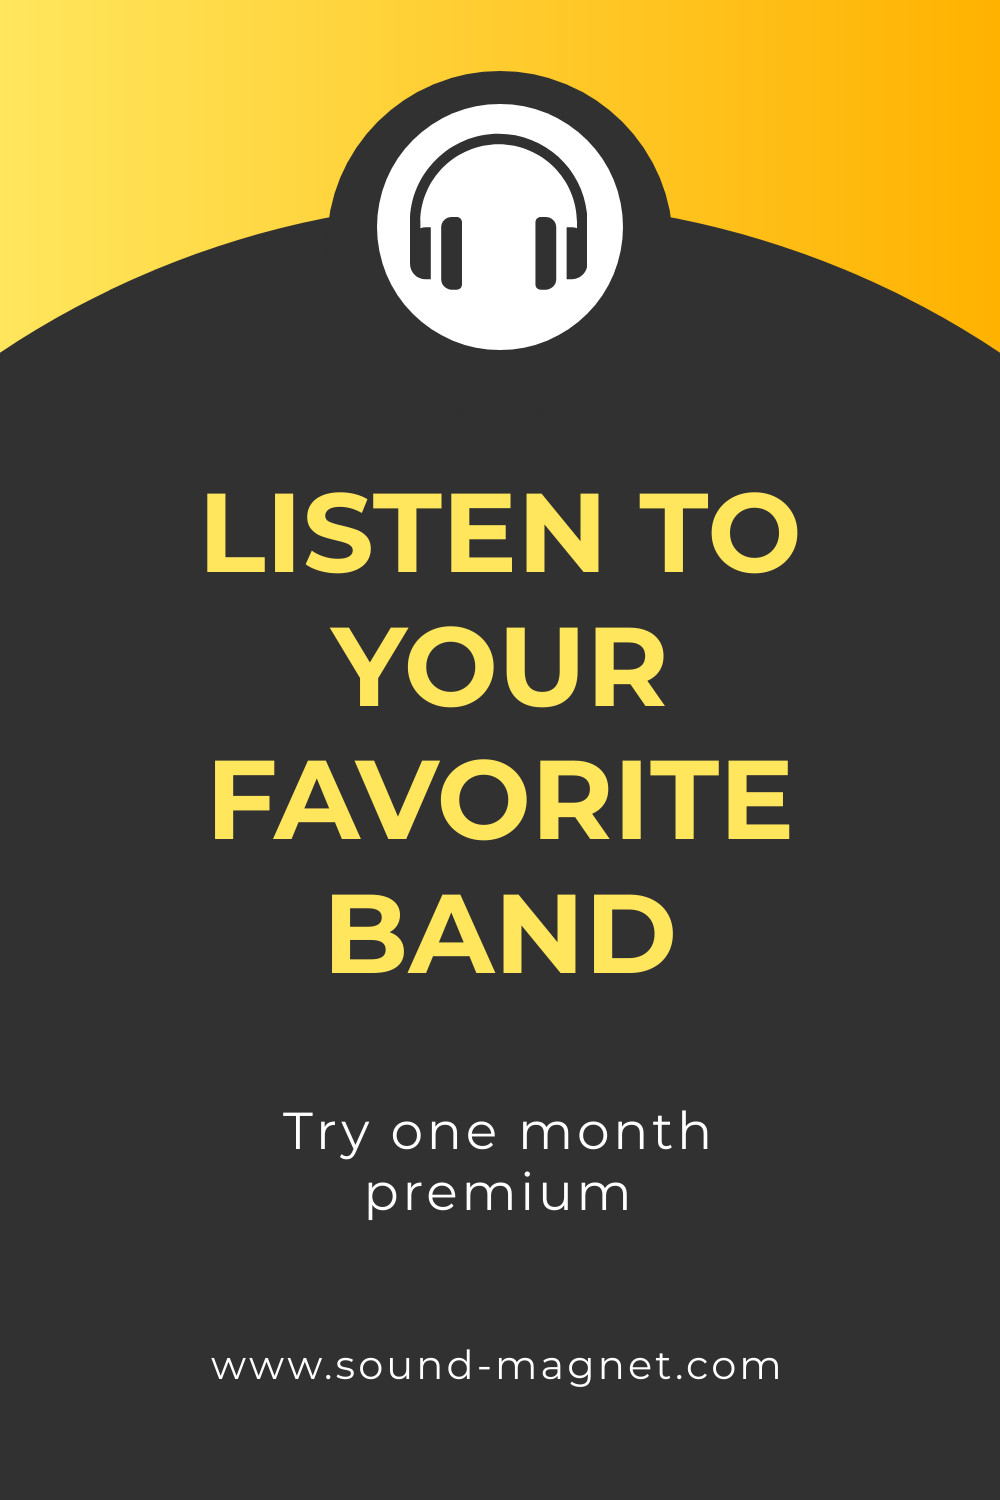 Listen to you Favorite Band Online